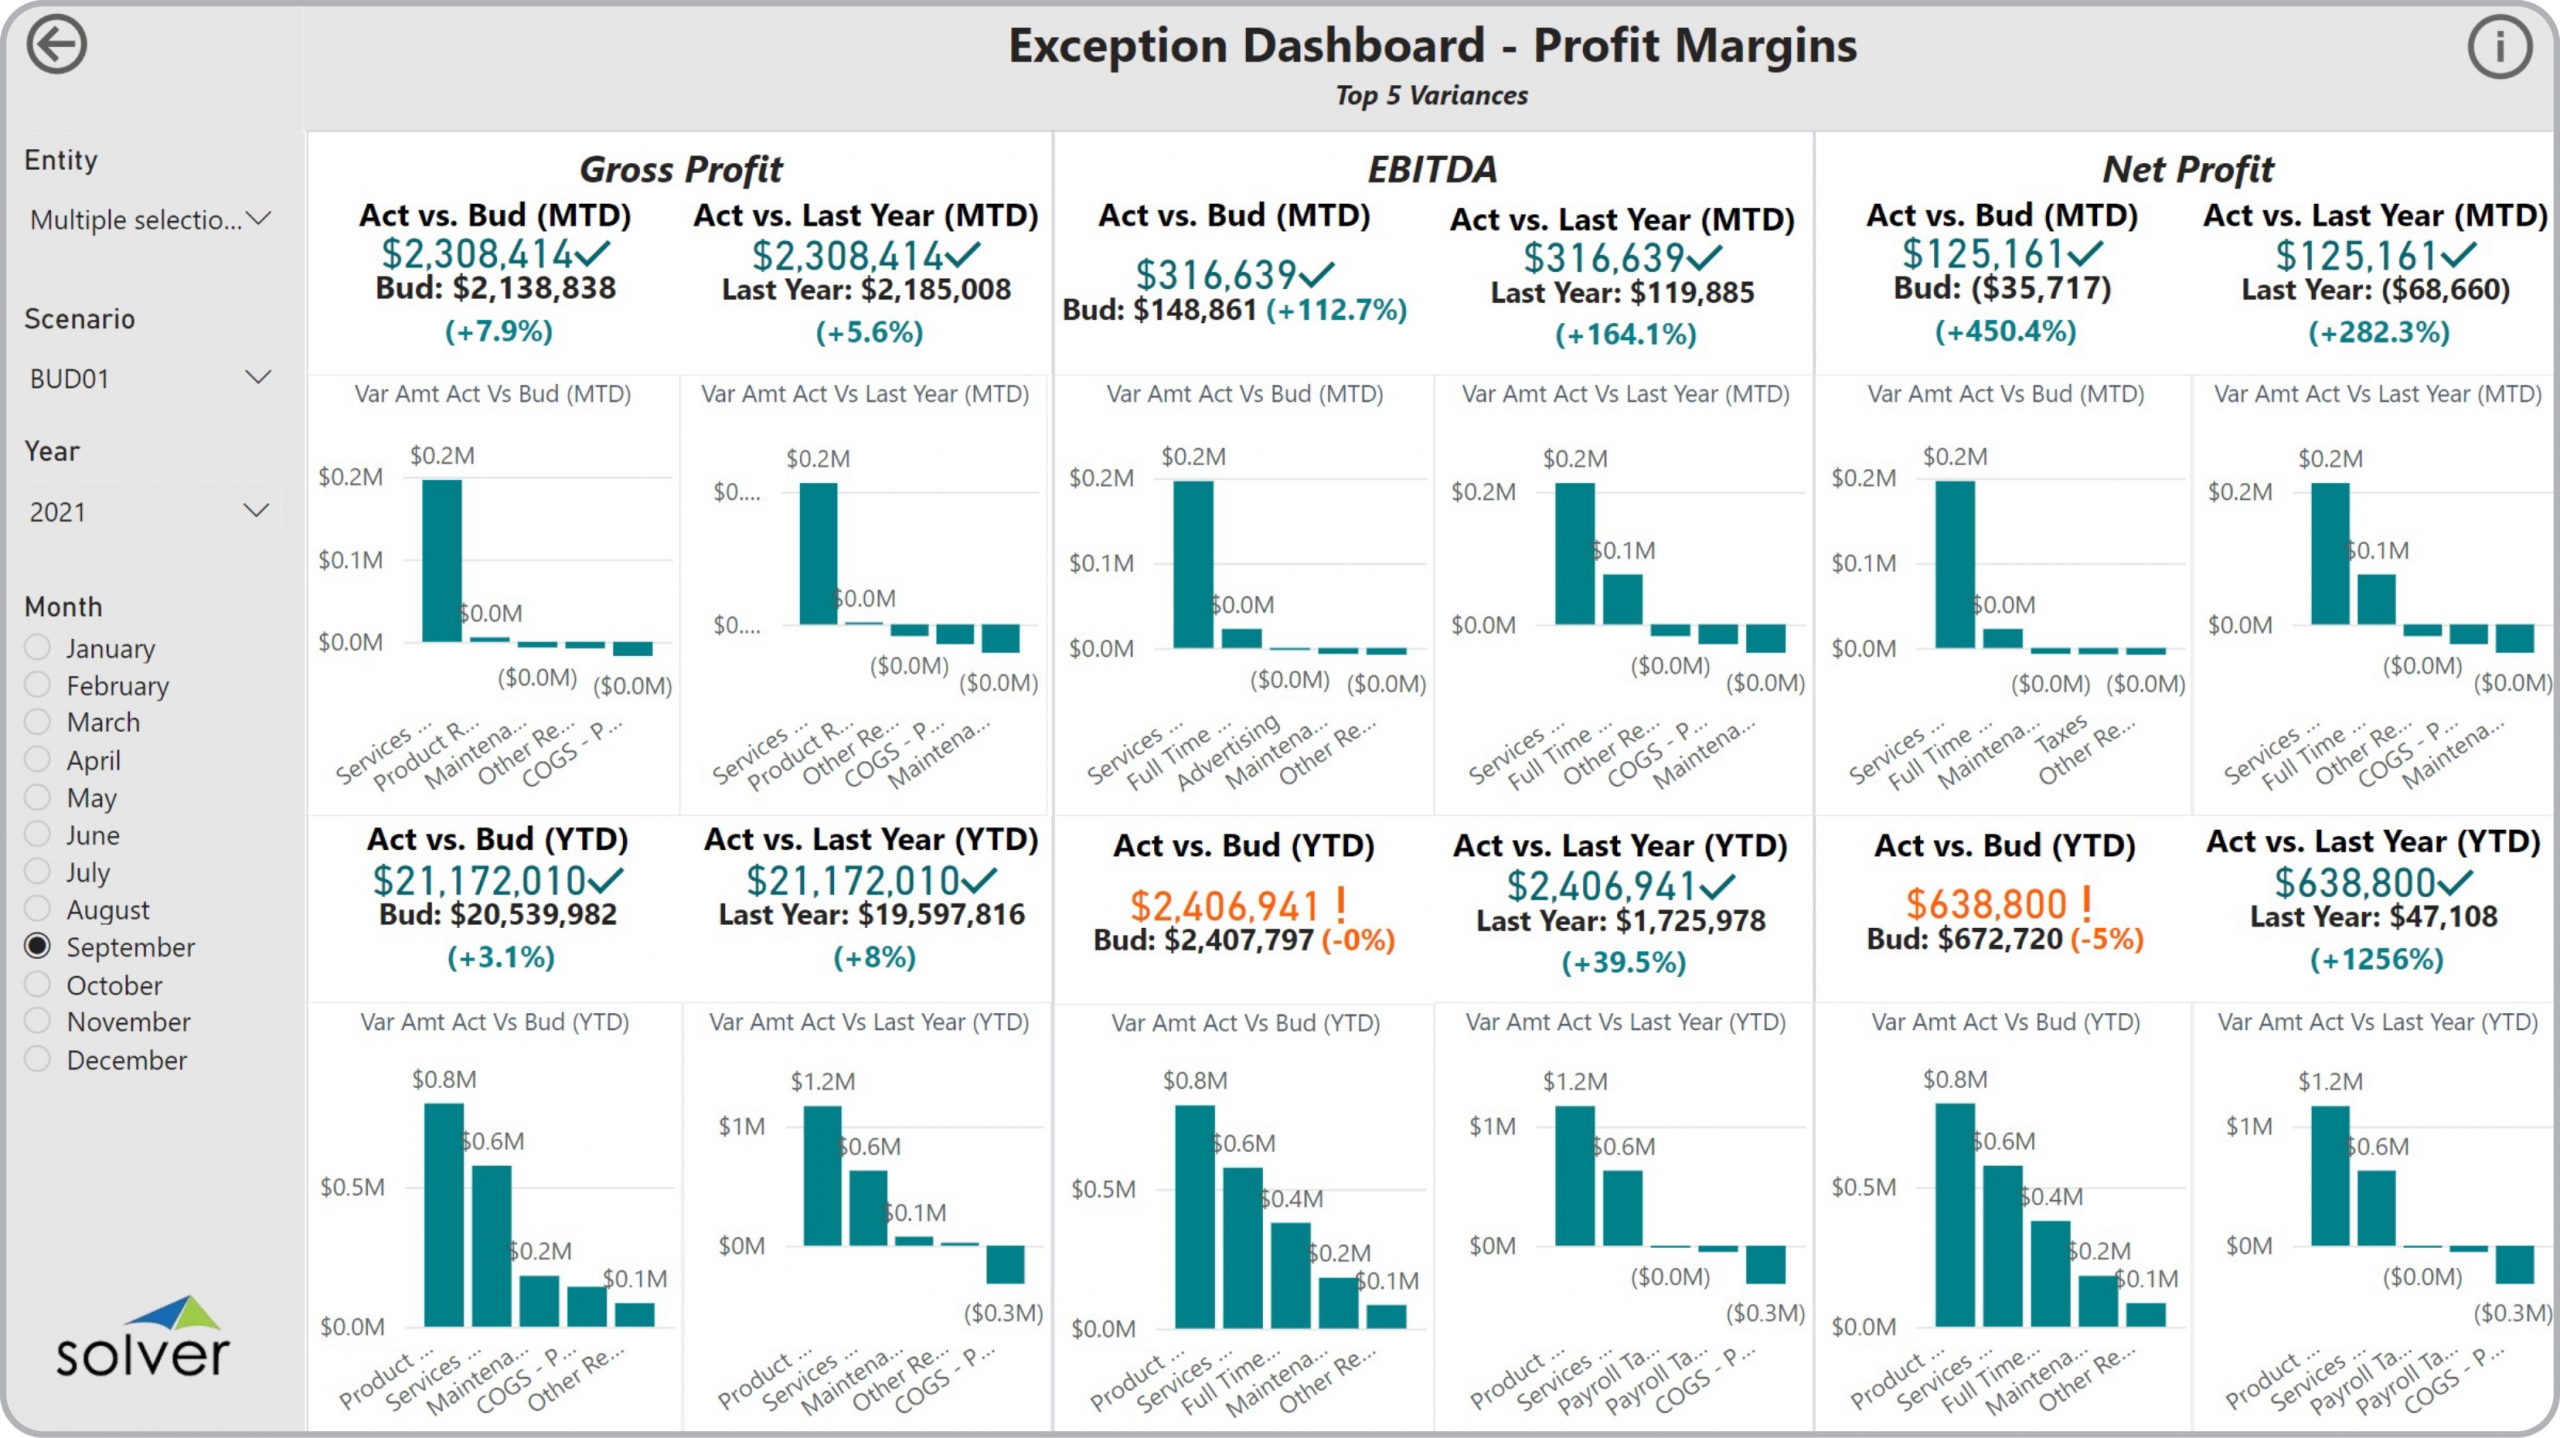 Example of an Profitability Exception Dashboard to Streamline the Monthly Analysis Process